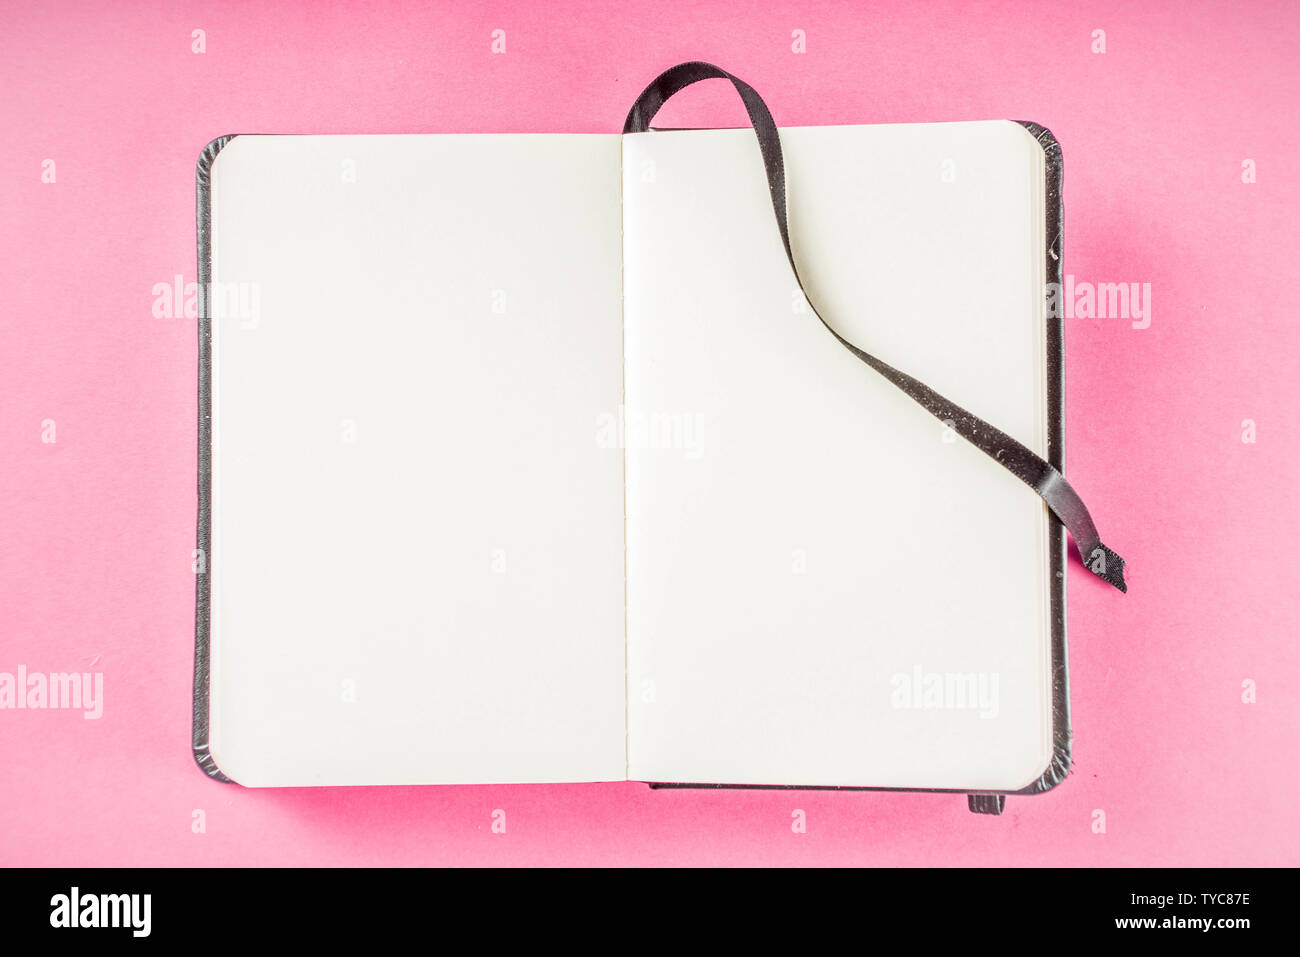 Alarm clock with notepad on bright pink table. Performance, work or study concept, Creative flatlay copy space above Stock Photo